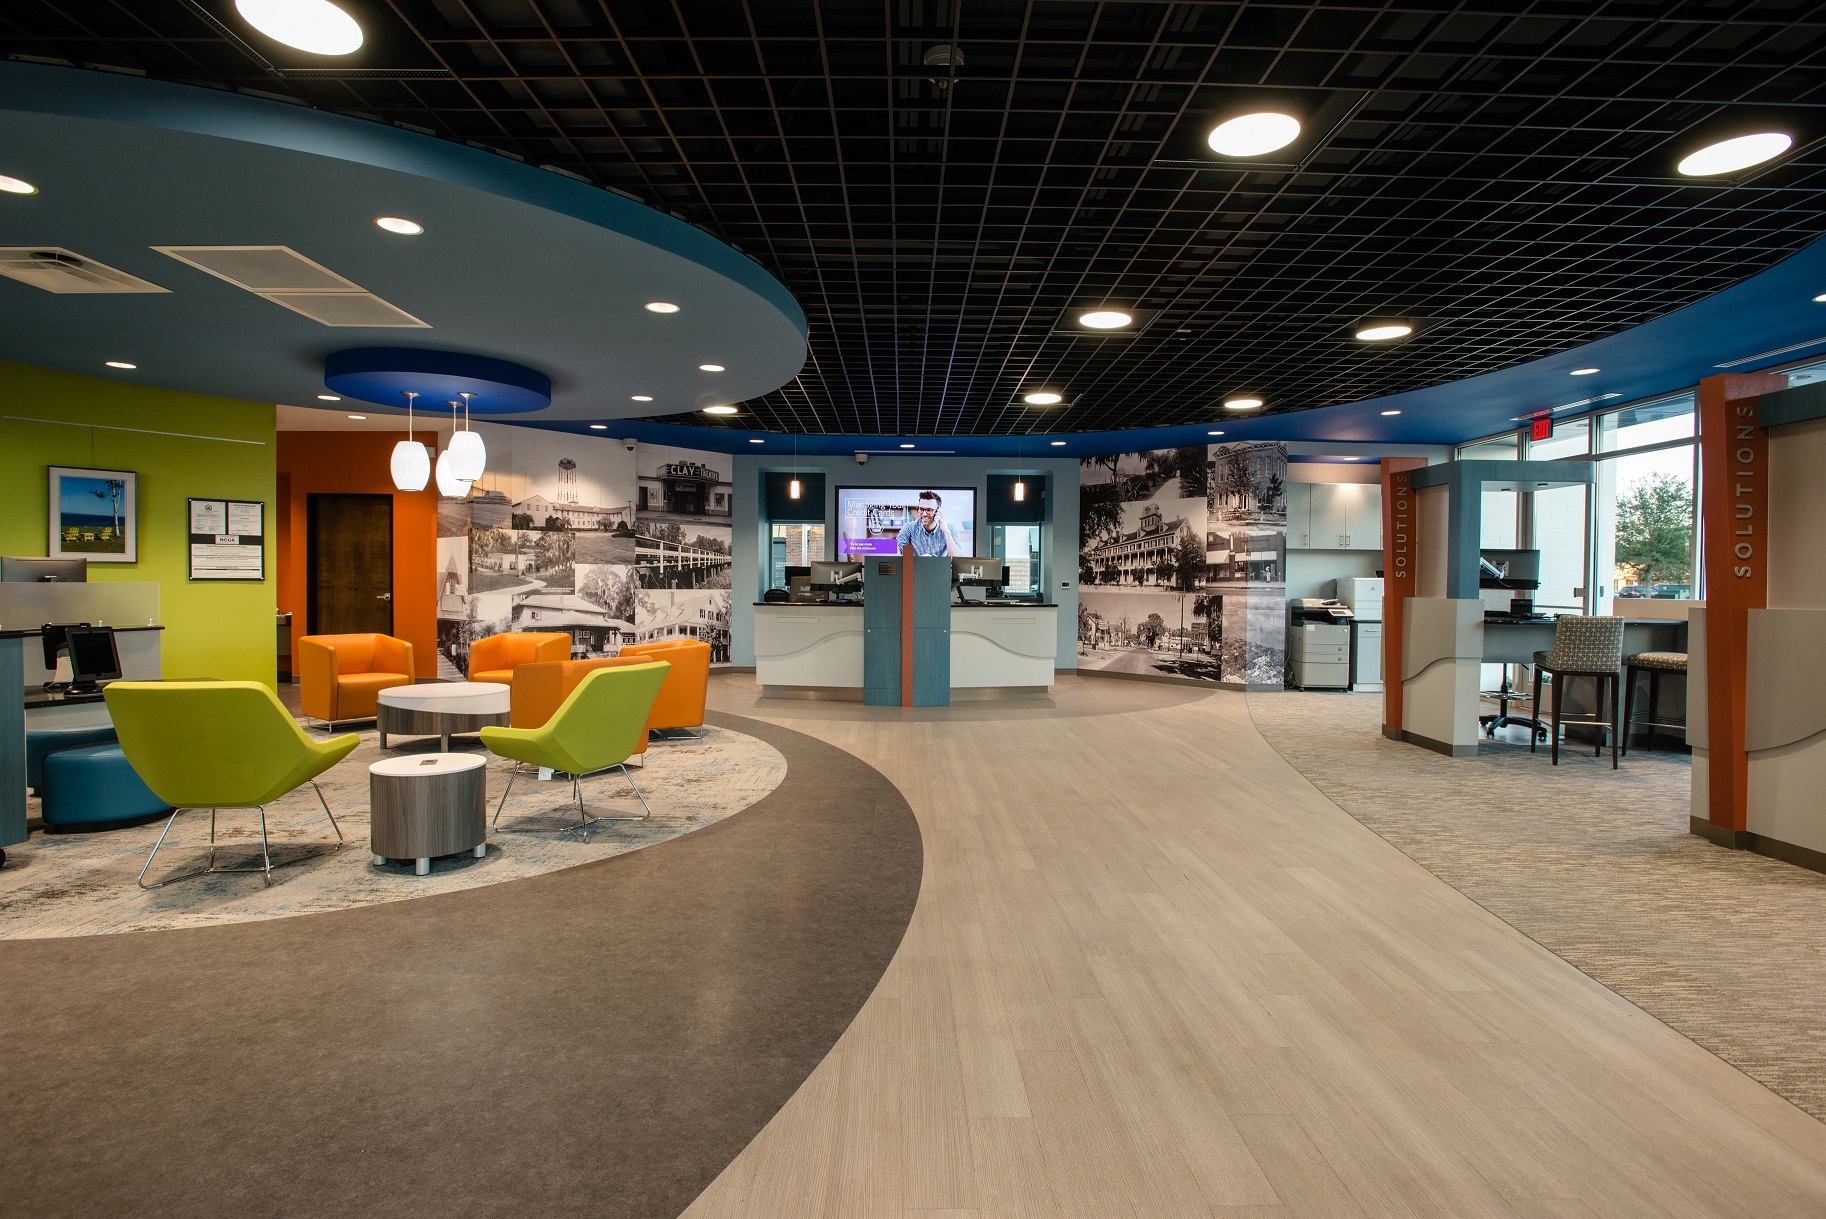 Interior of the reimagined Community First Credit Union branch.